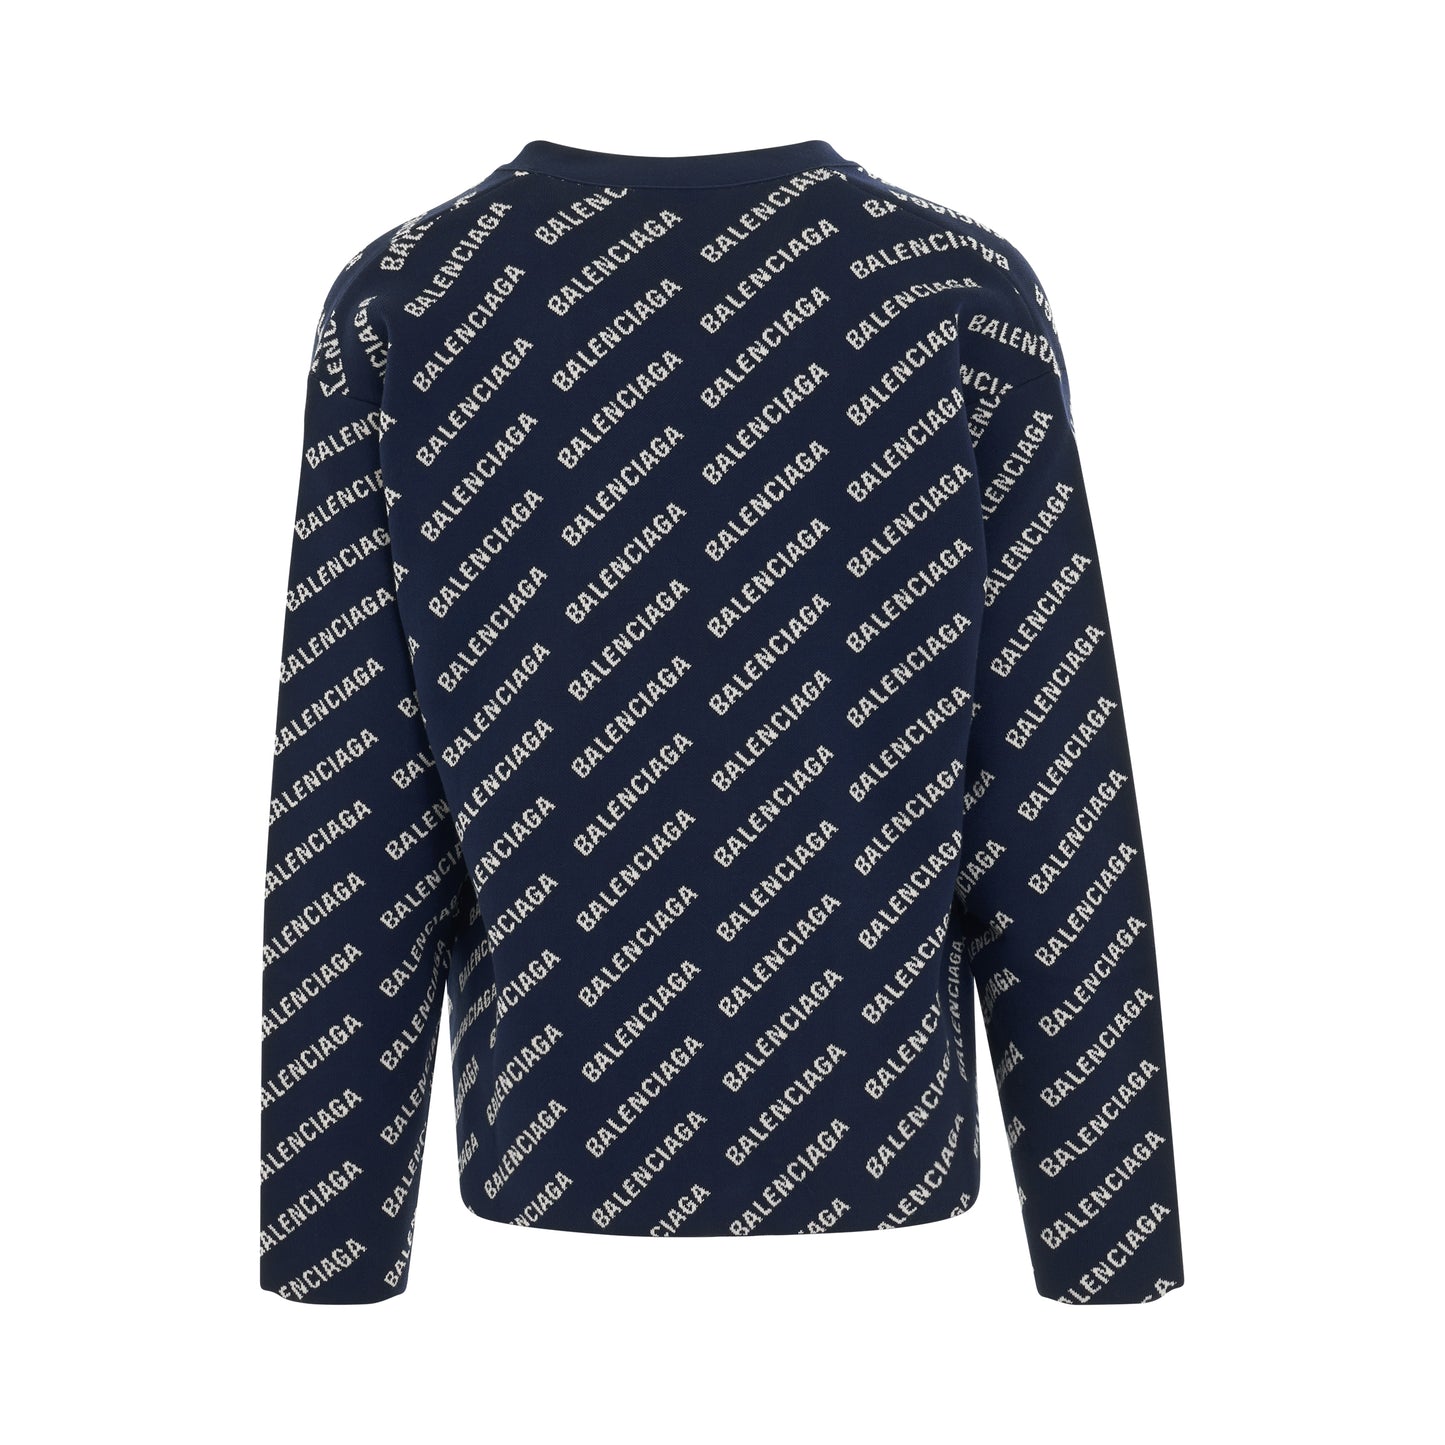 All Over Logo Knit Cardigan in Navy/White